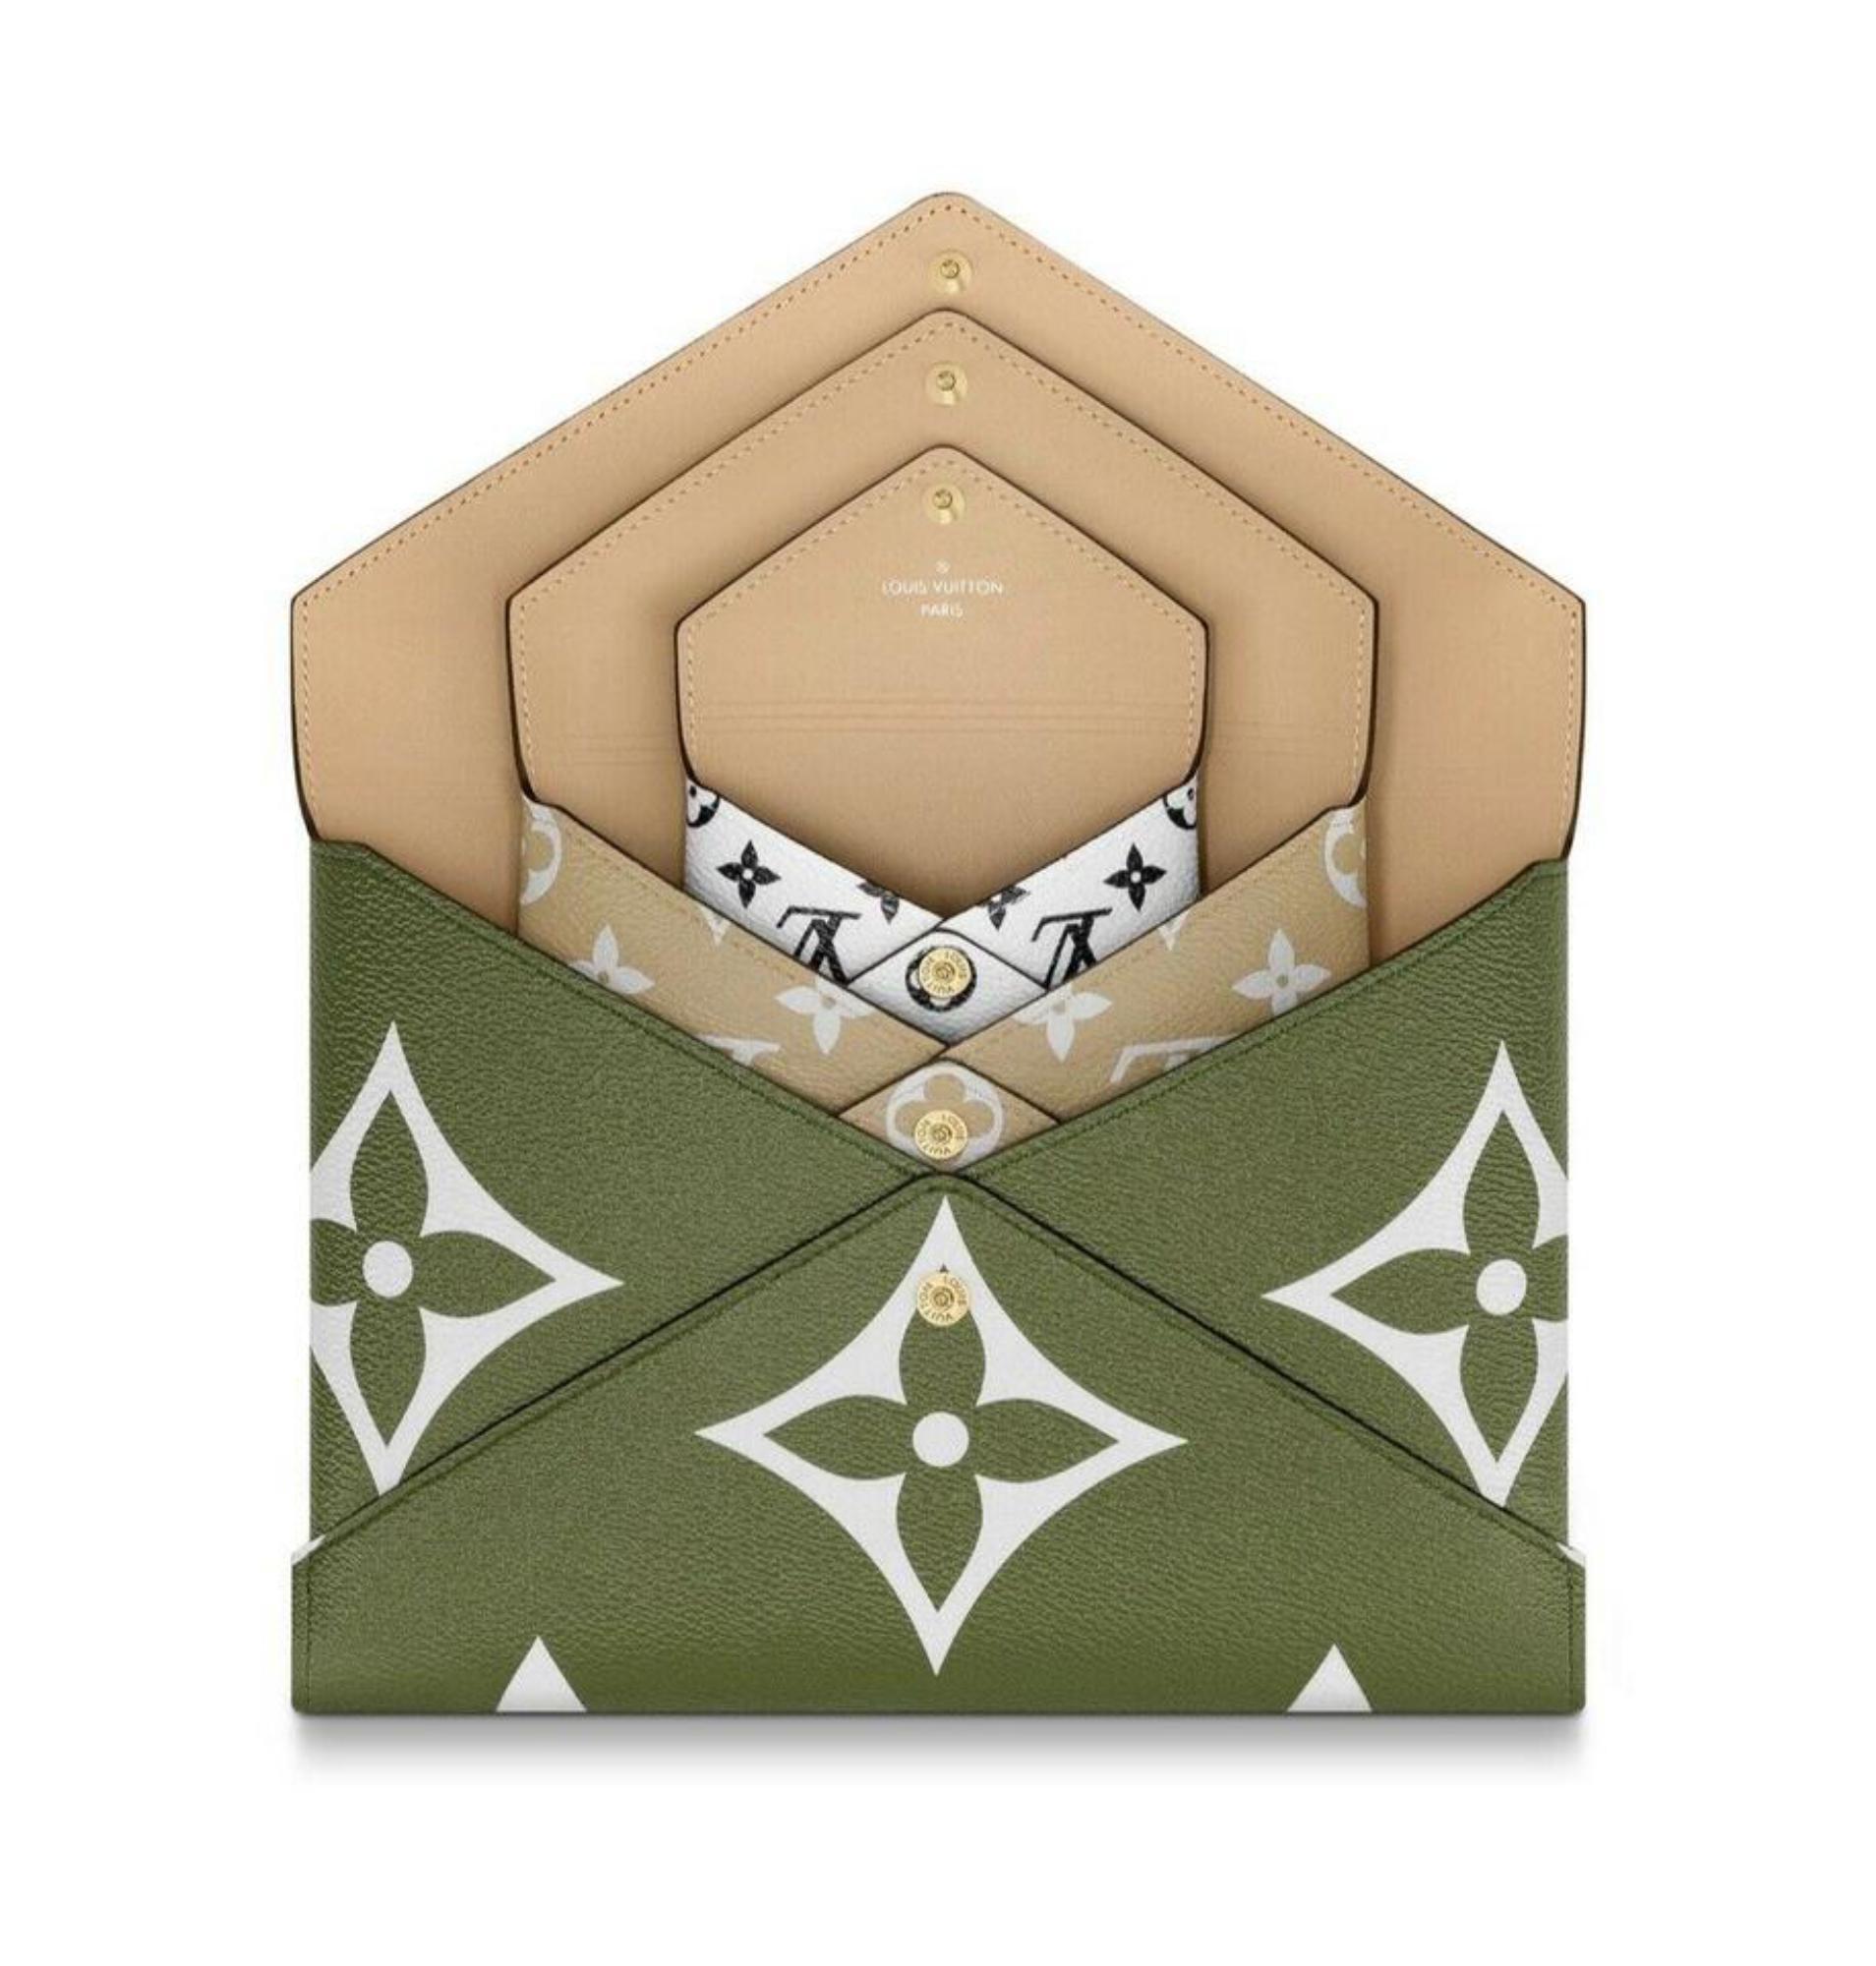 Louis Vuitton Pochette Kirigami Set Of Three Envelope 870430 GreenCanvas Clutch In New Condition For Sale In Forest Hills, NY